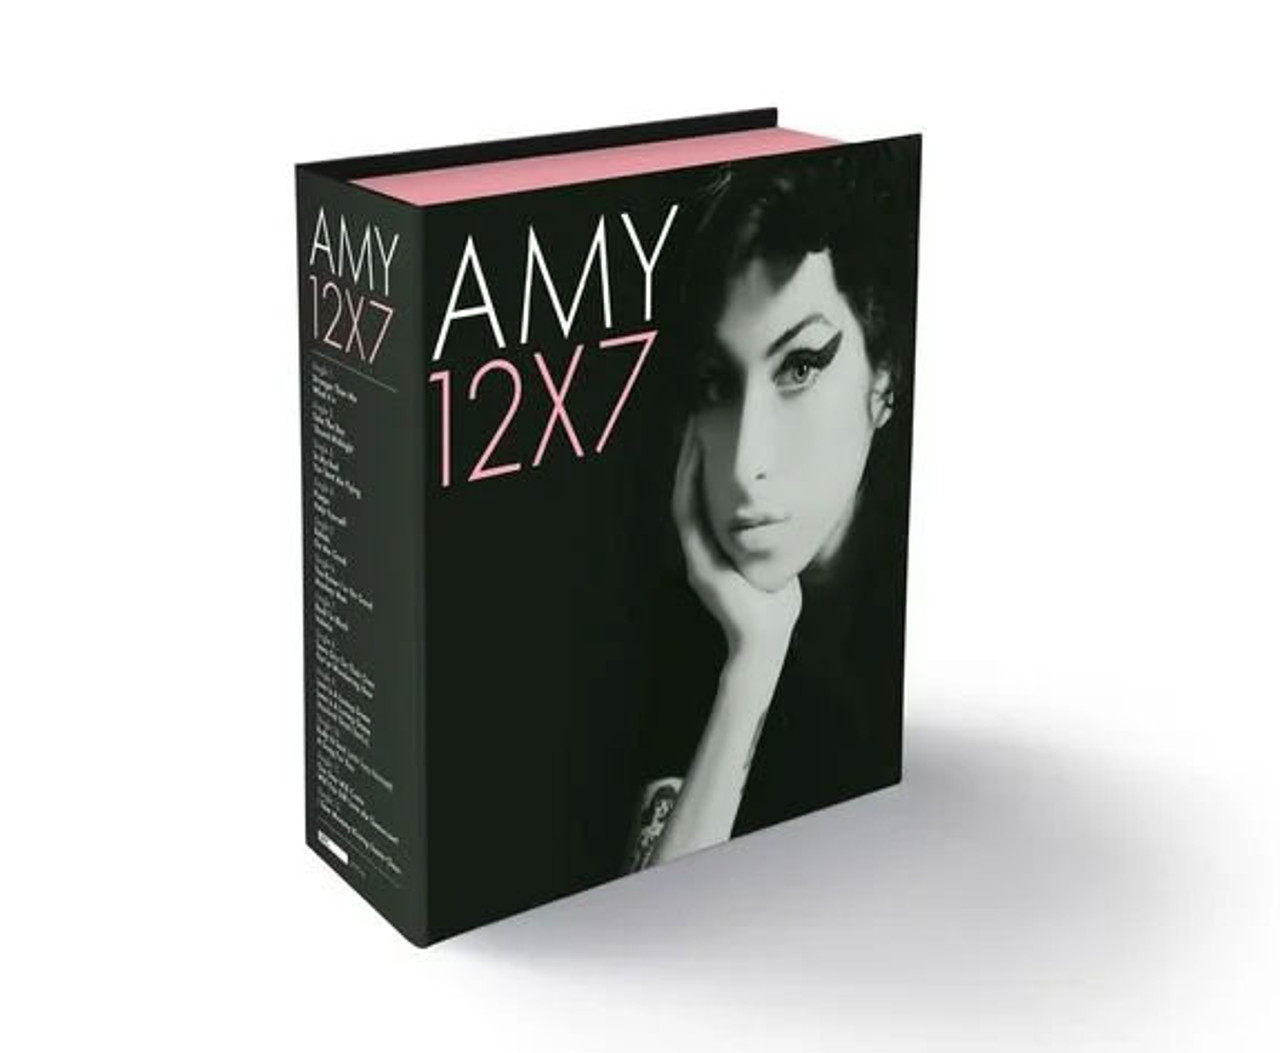 Amy Winehouse 12x7: The Singles Collection 45rpm 7 Vinyl 12Disc Box Set